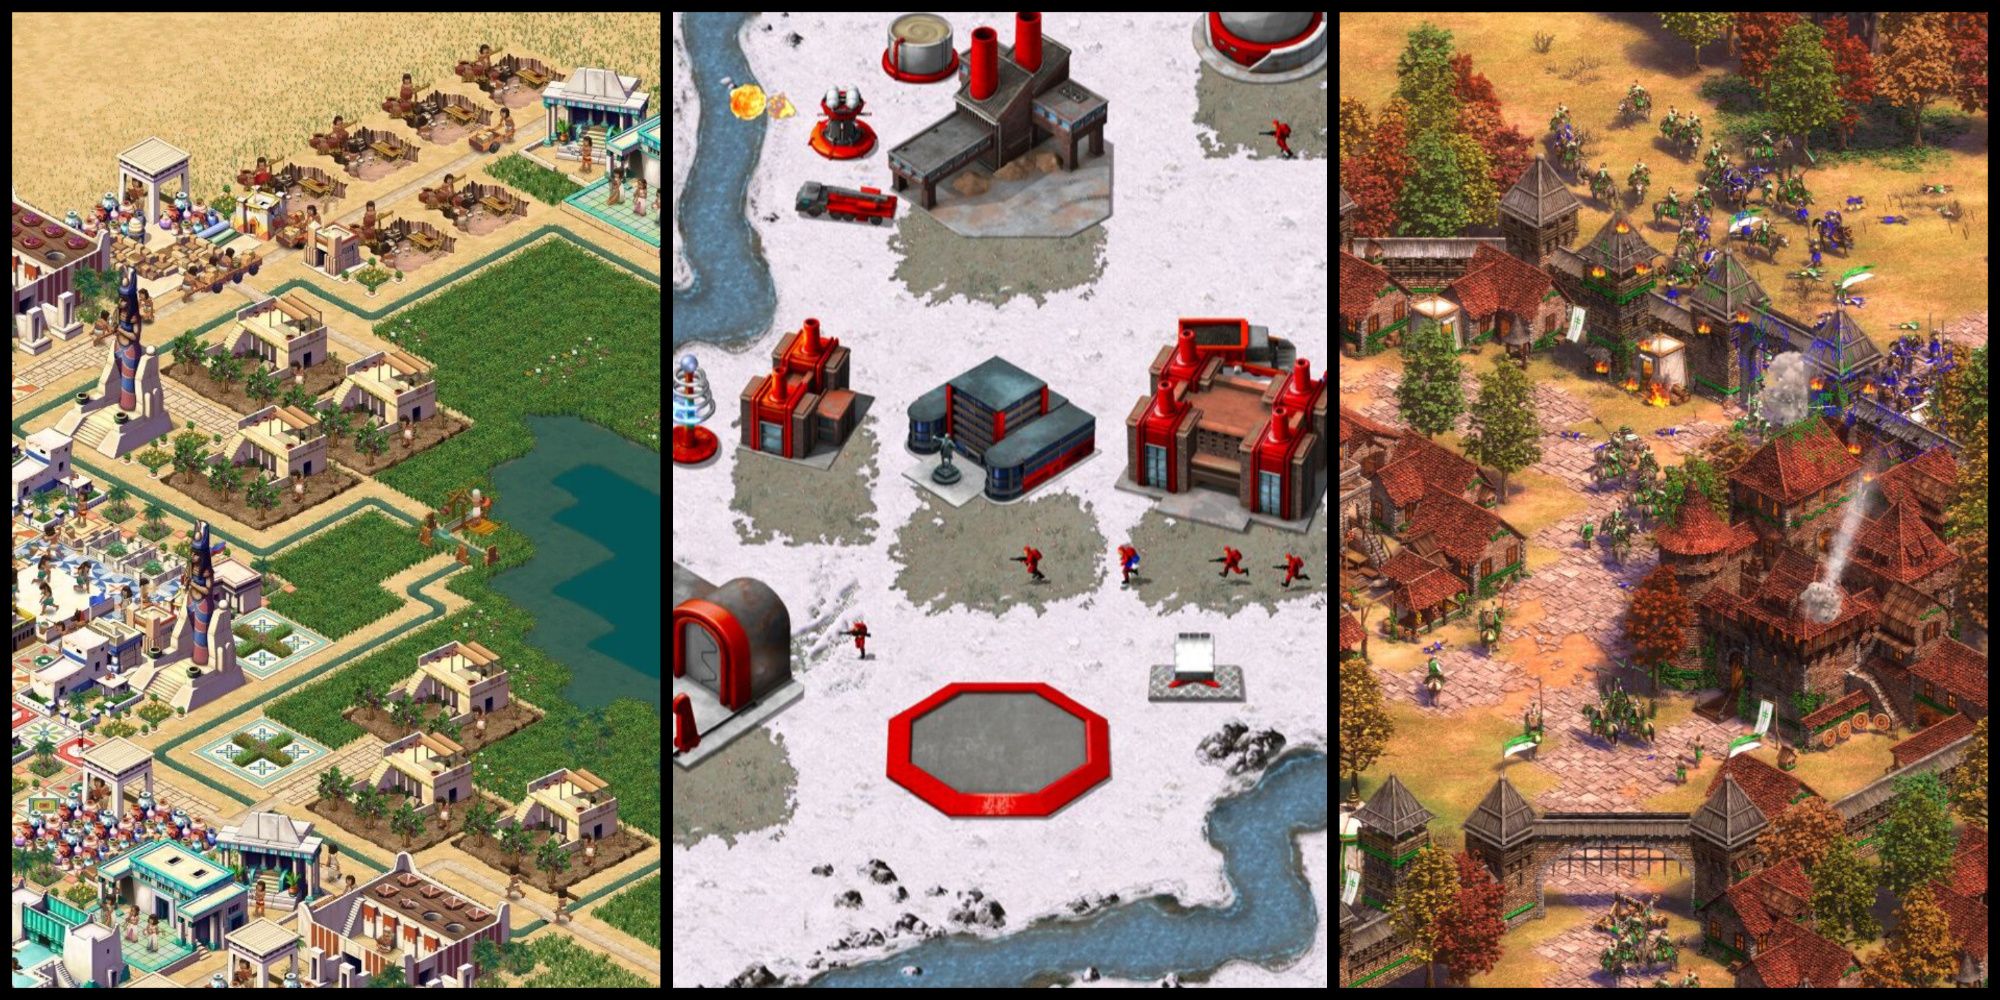 Pictures from Pharaoh: A New Era, Command & Conquer Remastered Collection, Age of Empires 2: Definitive Edition